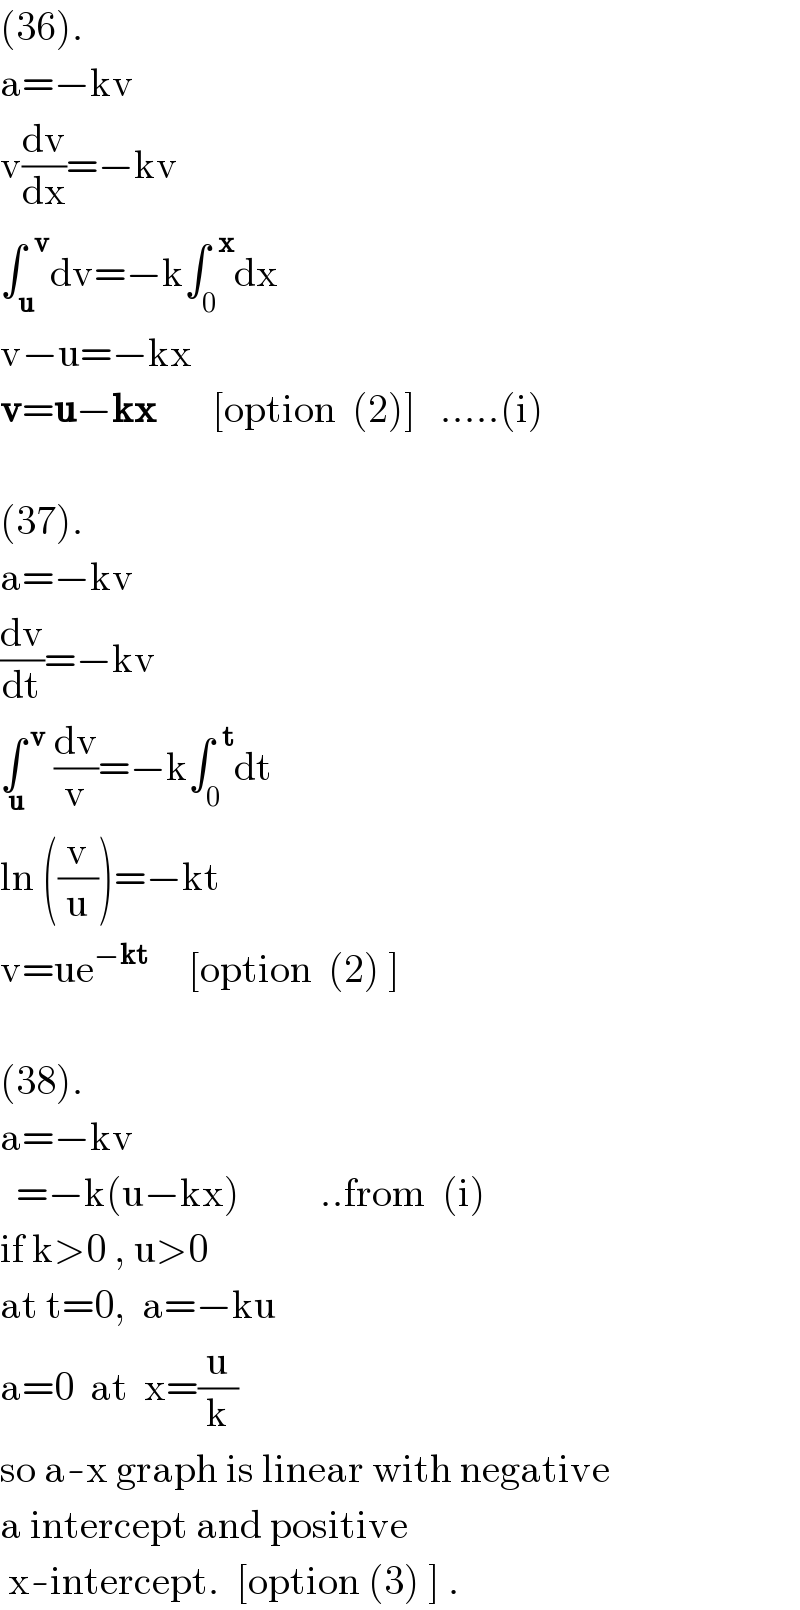 (36).  a=−kv  v(dv/dx)=−kv  ∫_u ^(  v) dv=−k∫_0 ^(  x) dx  v−u=−kx  v=u−kx       [option  (2)]   .....(i)    (37).  a=−kv  (dv/dt)=−kv  ∫^( v) _(  u)  (dv/v)=−k∫_0 ^(  t) dt  ln ((v/u))=−kt  v=ue^(−kt)      [option  (2) ]    (38).  a=−kv    =−k(u−kx)          ..from  (i)  if k>0 , u>0  at t=0,  a=−ku  a=0  at  x=(u/k)  so a-x graph is linear with negative  a intercept and positive   x-intercept.  [option (3) ] .  